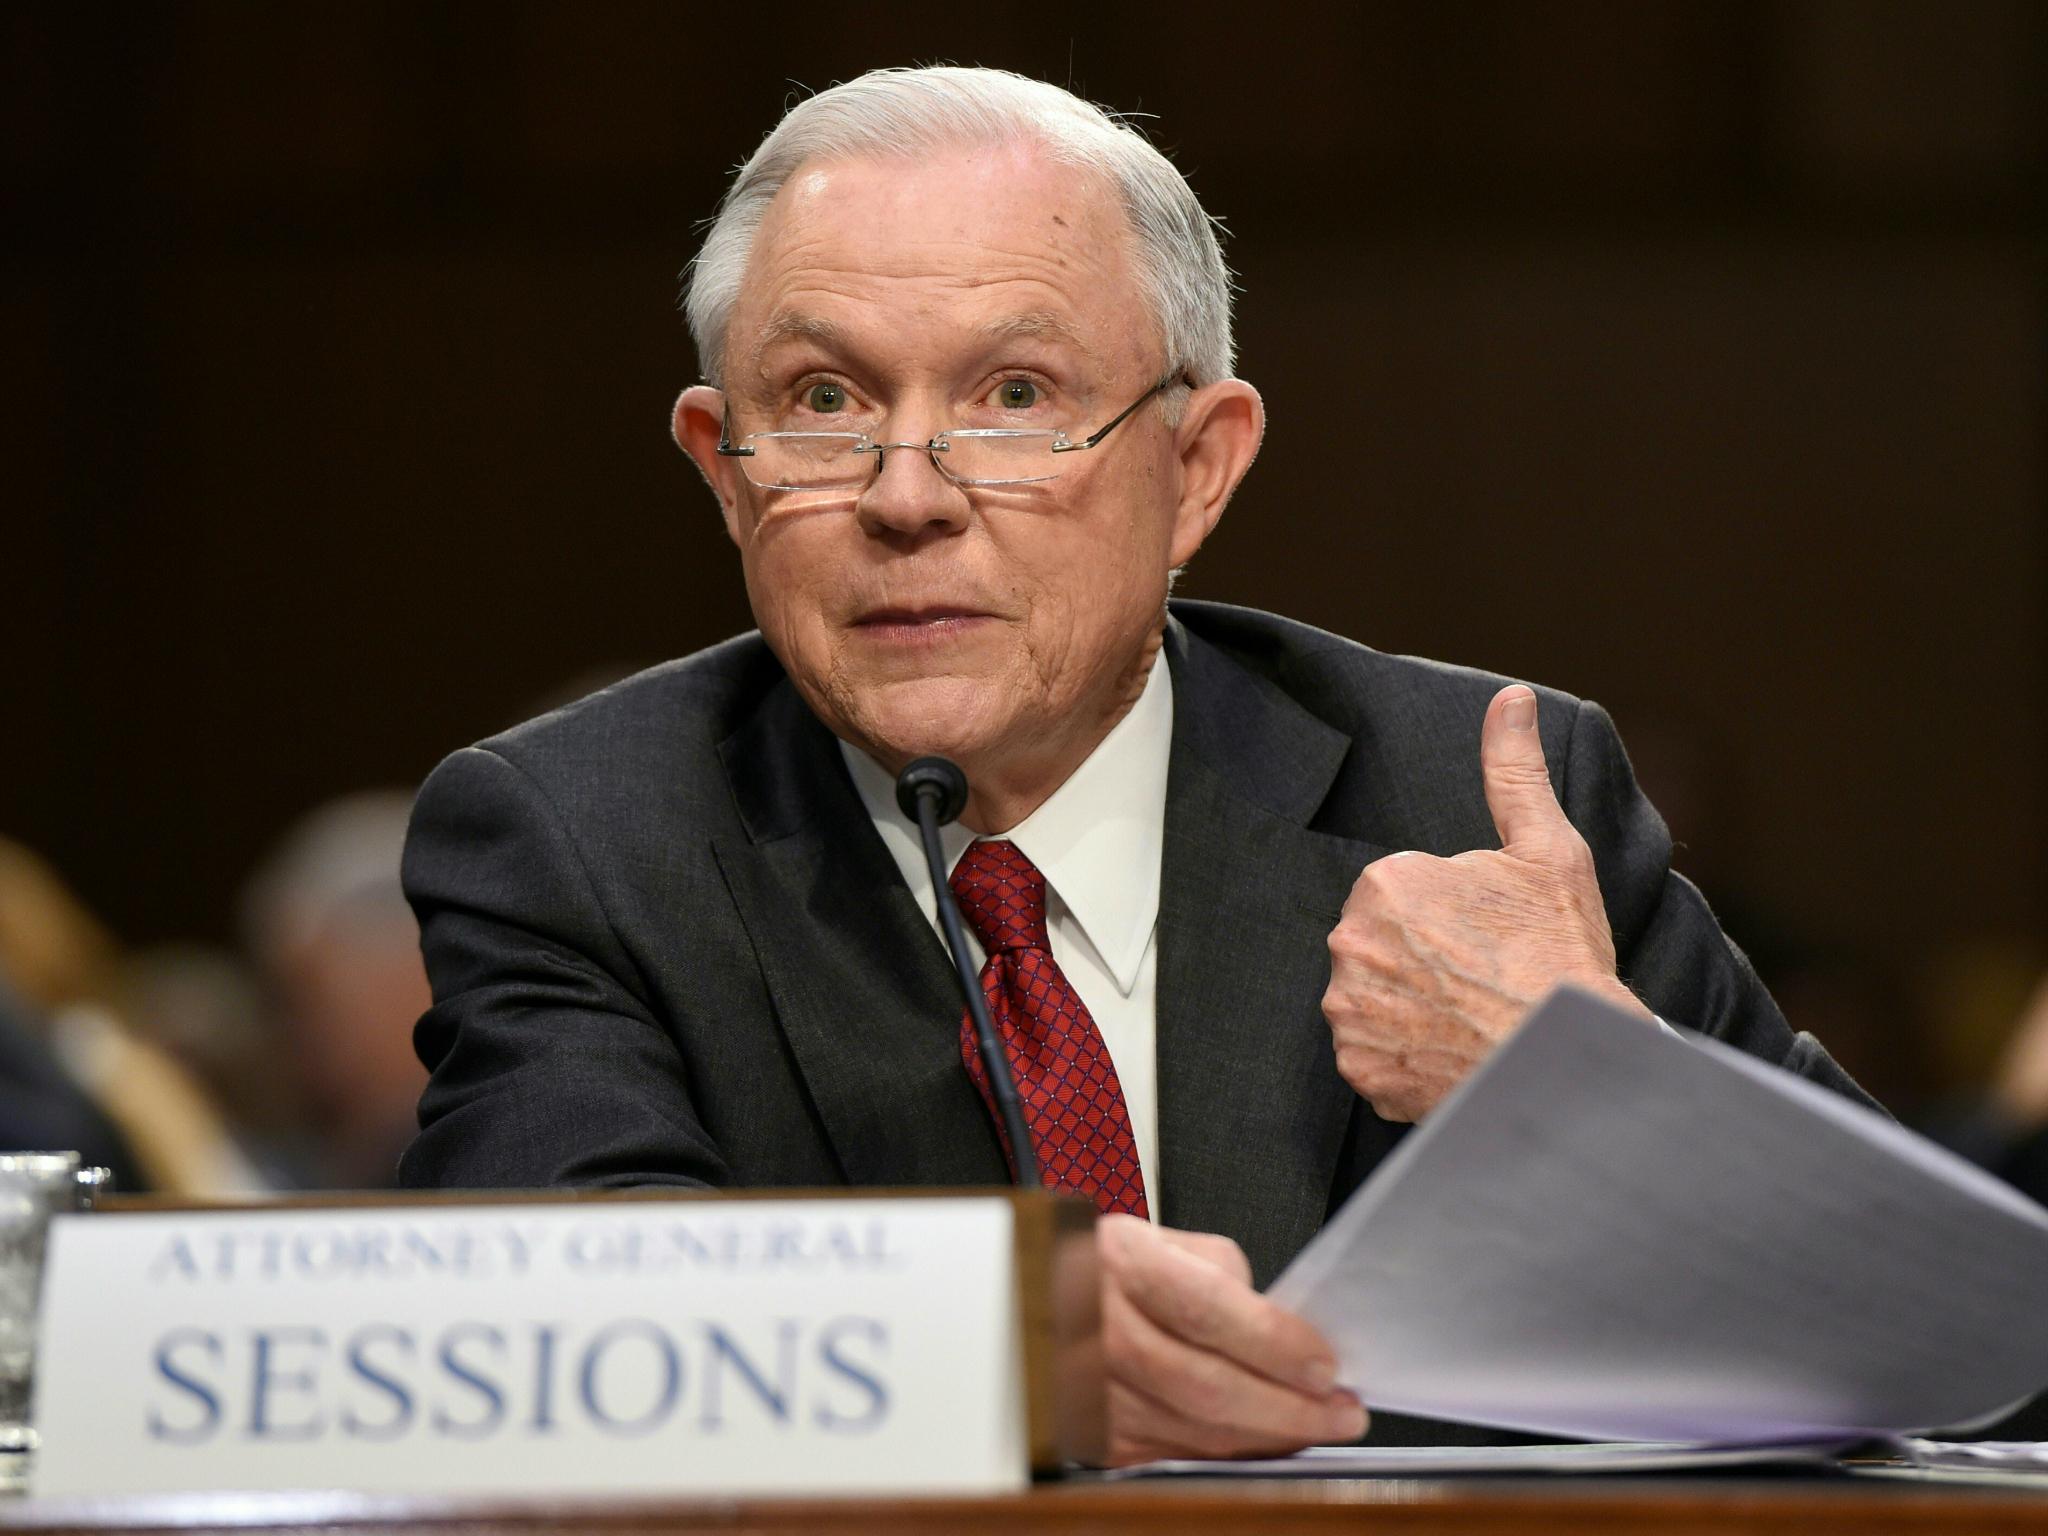 US Attorney General Jeff Sessions testified in front of the Senate on Russia, which a former CIA analyst said is a threat that is being ignored in terms of policy